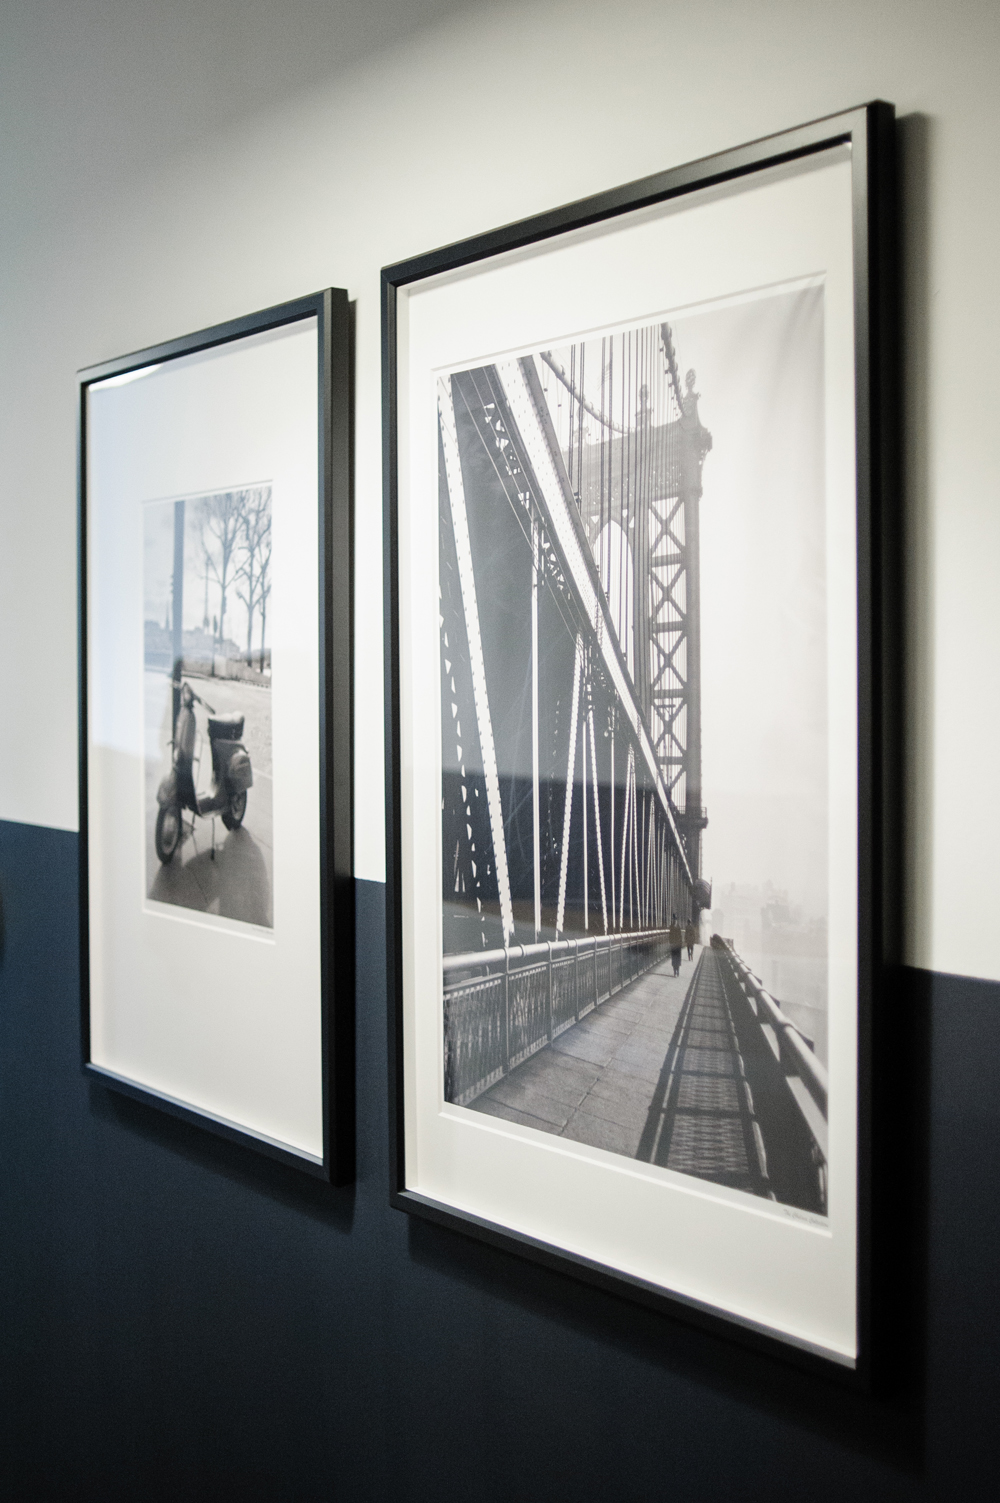 Black and white photography gallery wall.